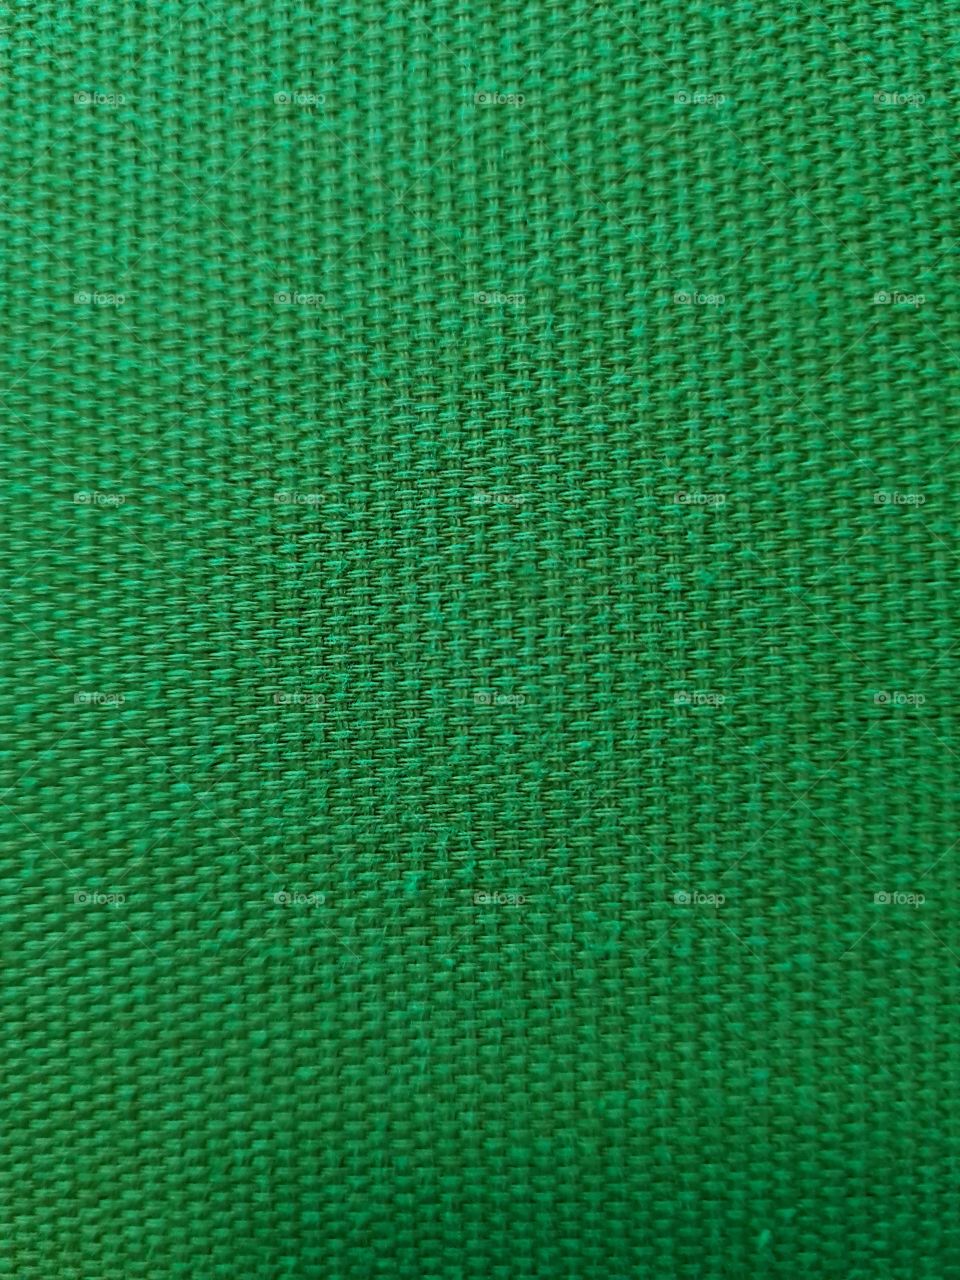 Bright green textile texture of a thick fabric seen from up close.